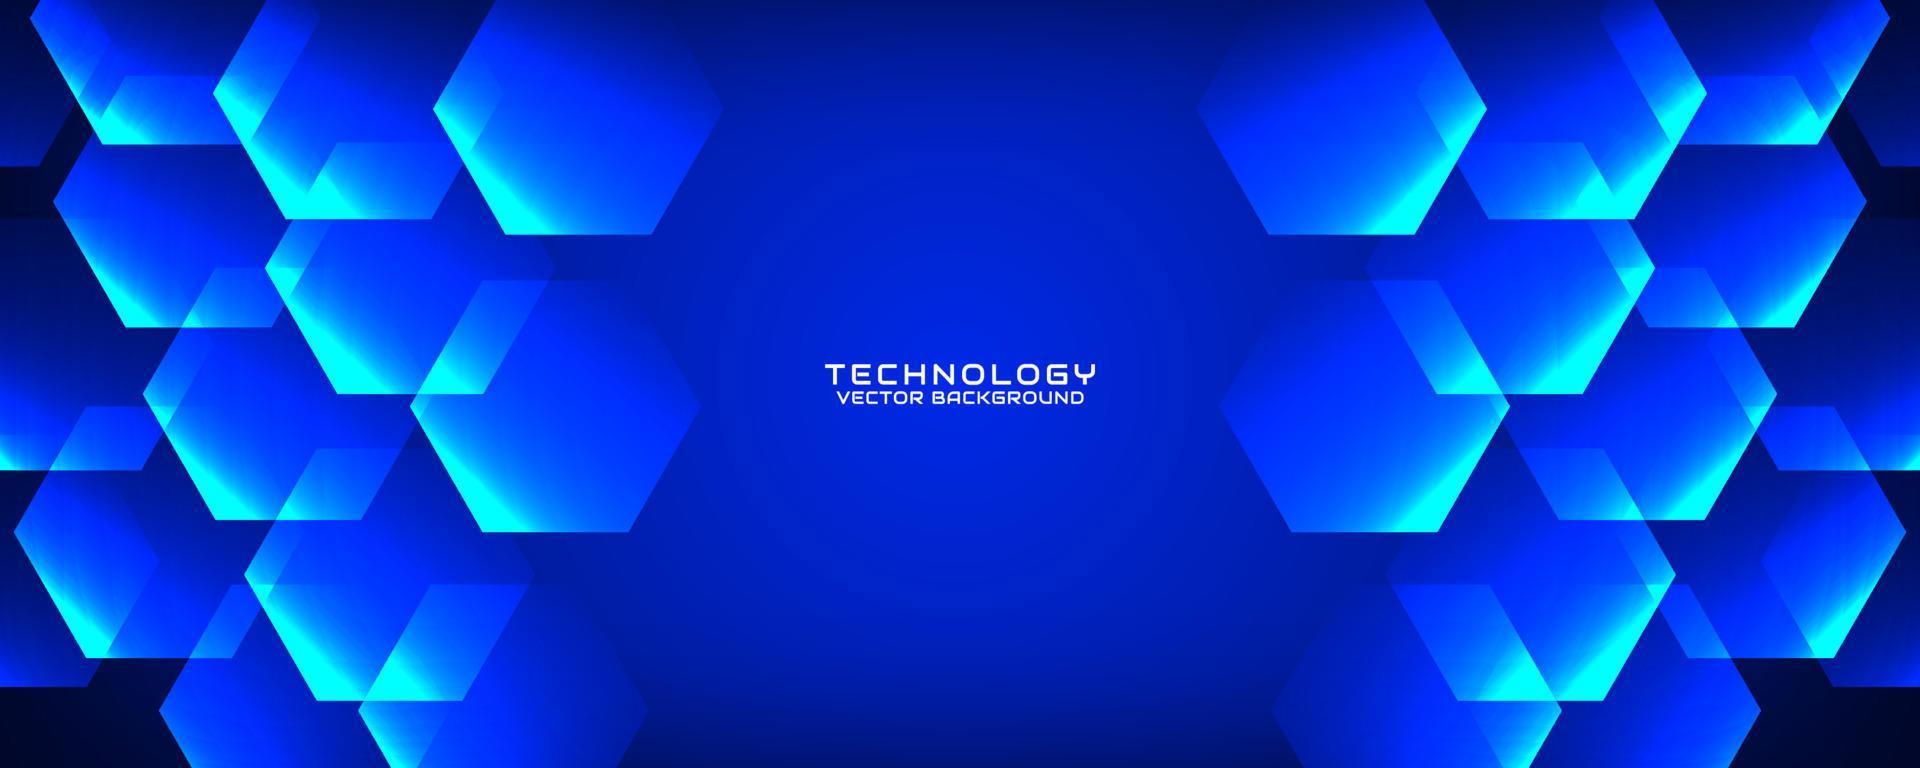 3D blue technology abstract background overlap layer on dark space with hexagons effect decoration. Graphic design element cutout style concept for banner, flyer, card, brochure cover, or landing page vector